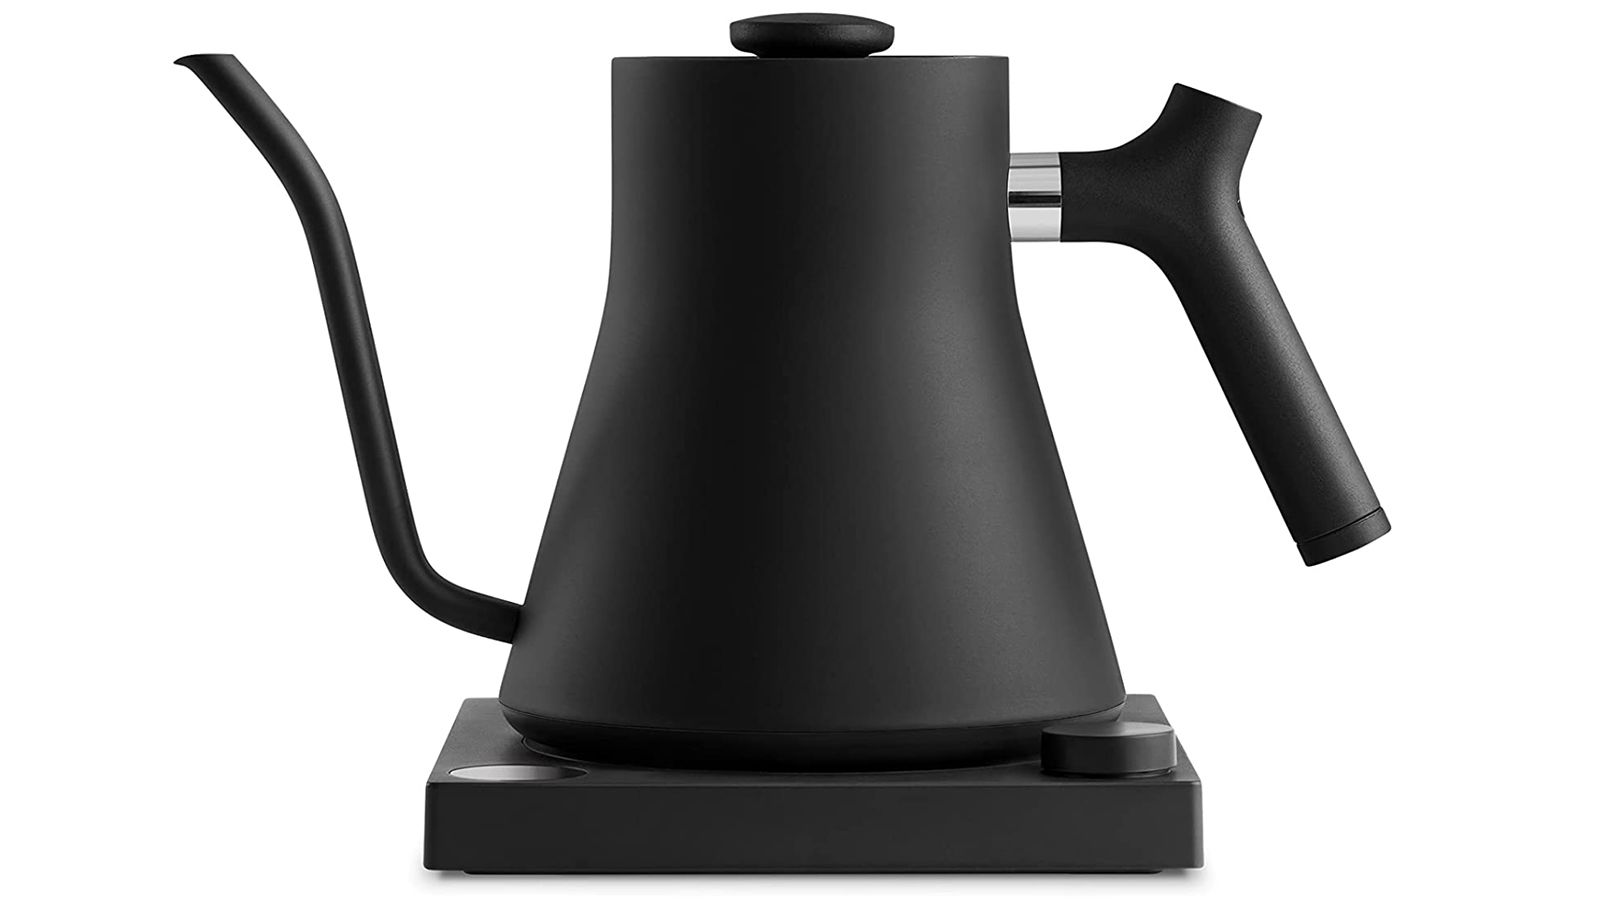 Cuisinart Jug Kettle CJK429 Review: Well-designed and drip-free